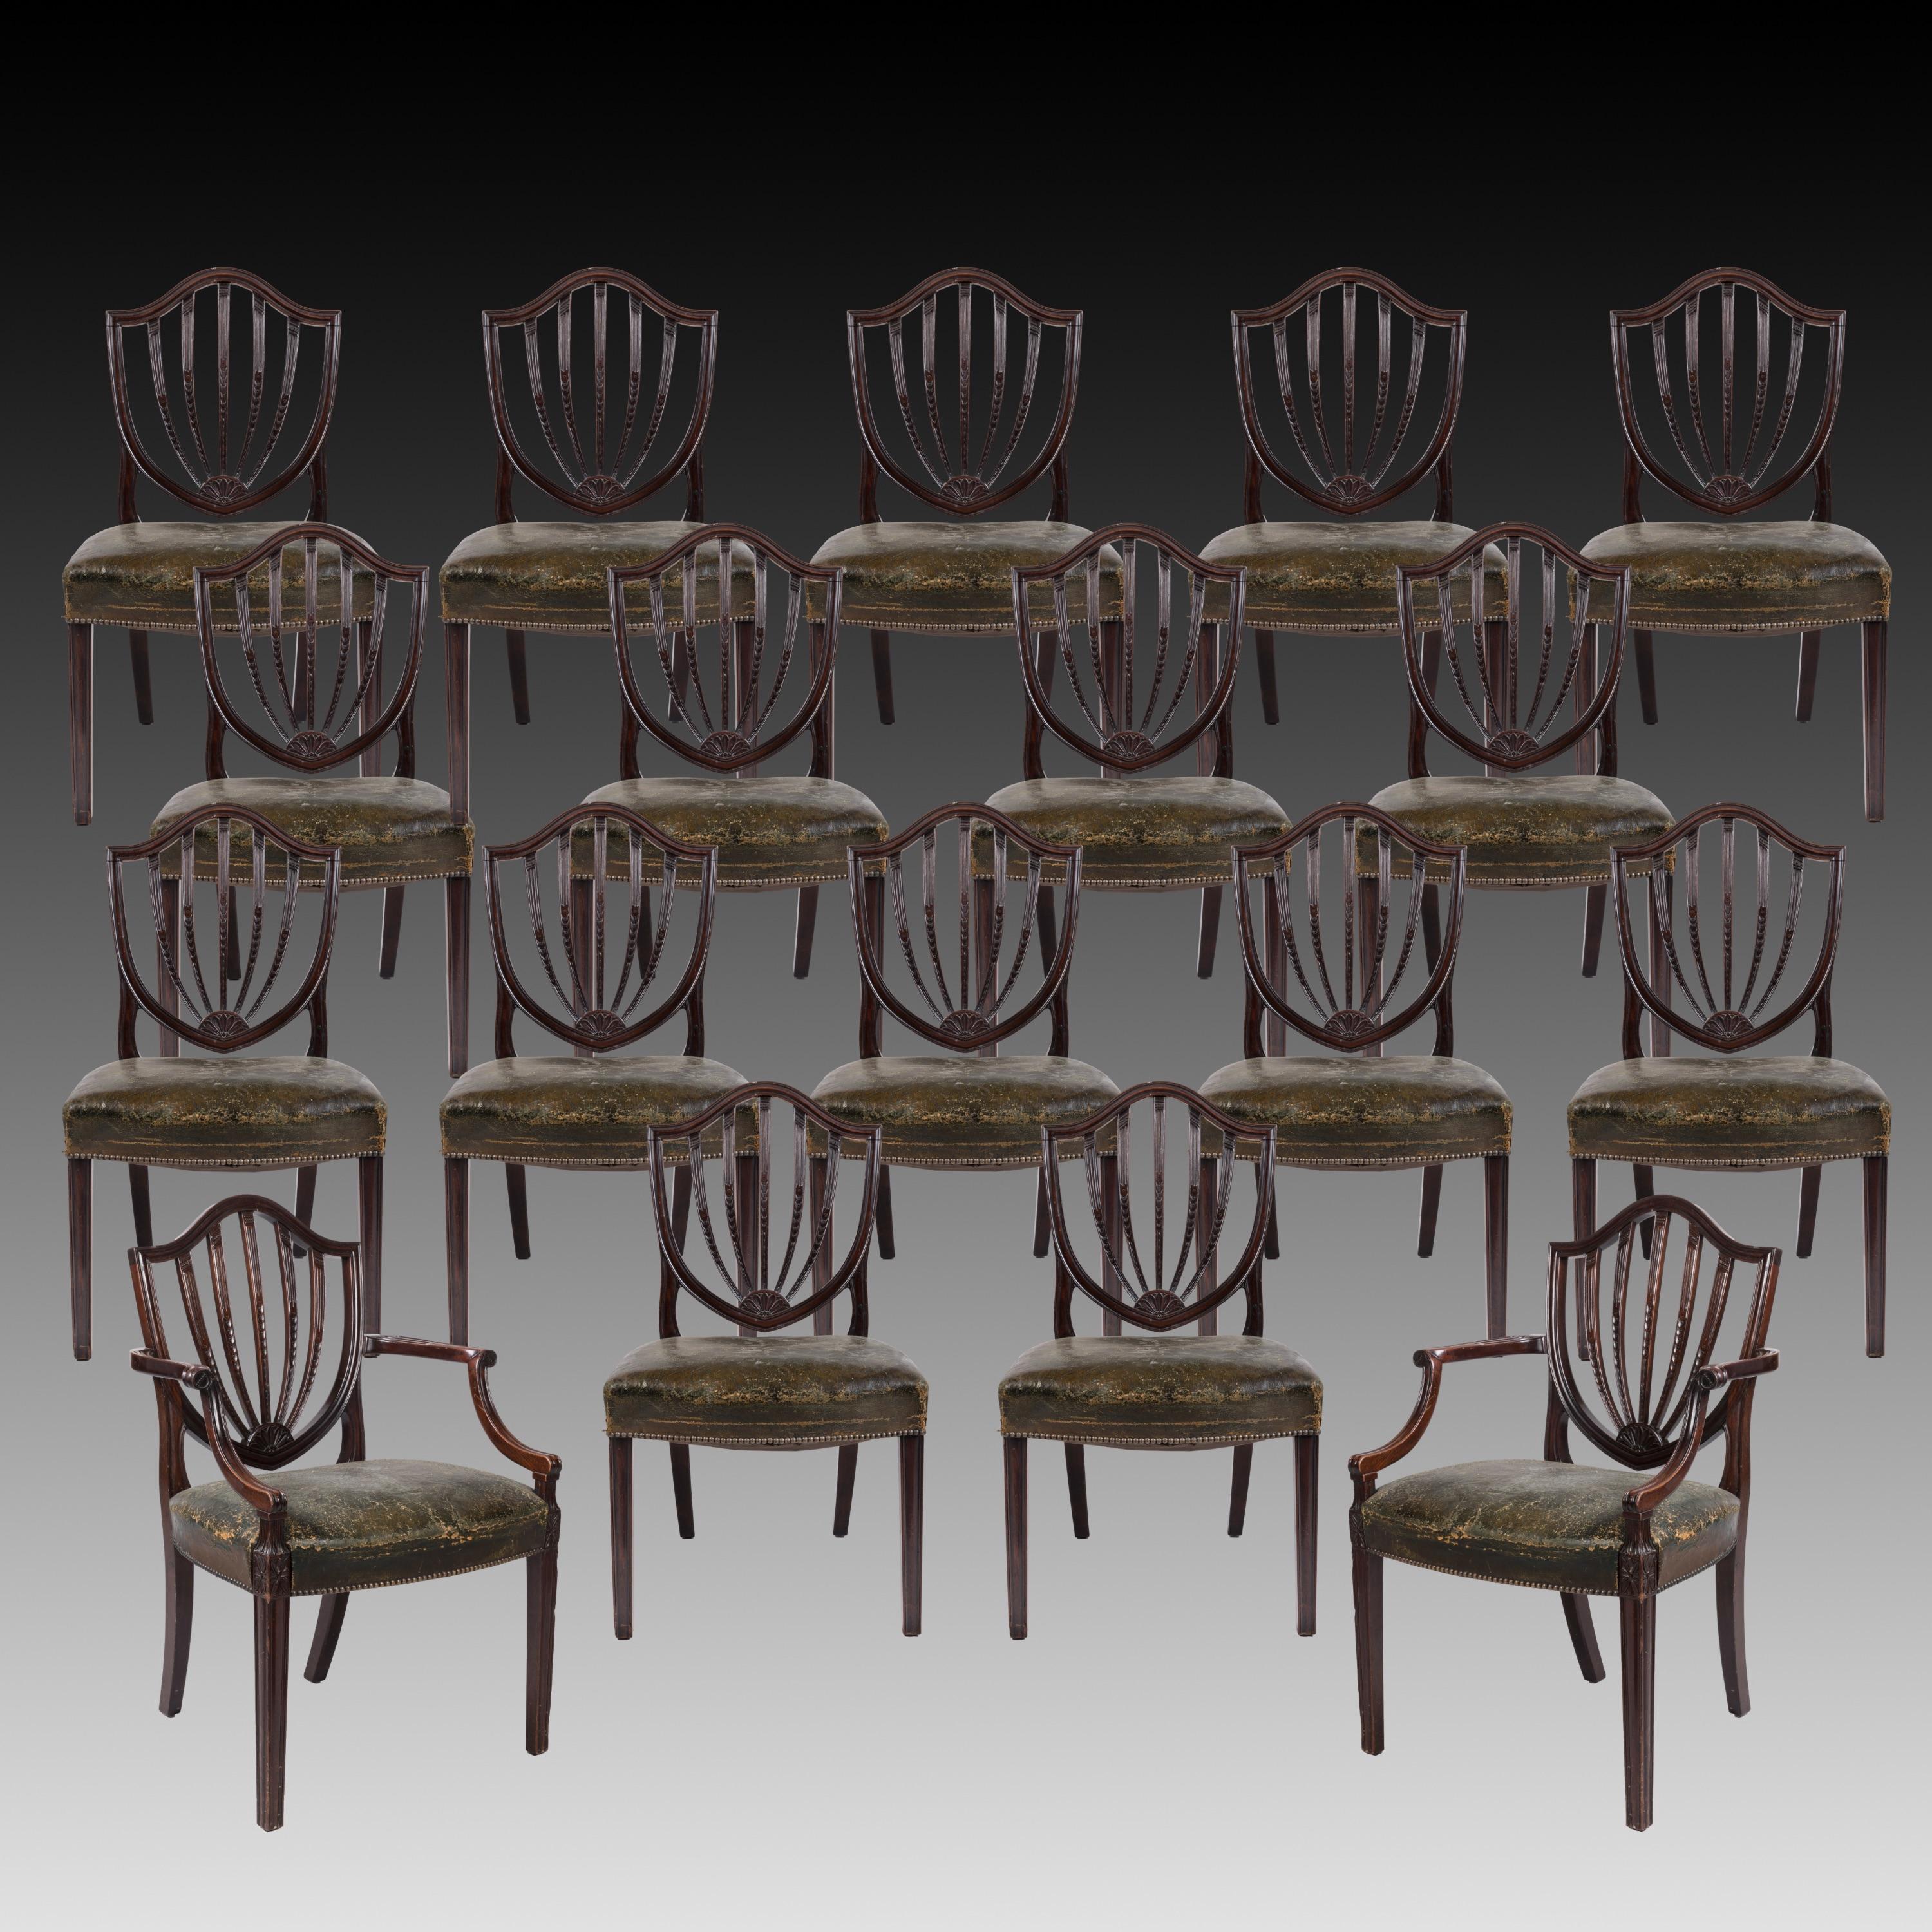 A Set of Twelve George III Style Dining Chairs
After the design by George Hepplewhite

Carved from mahogany, the set comprised of ten side chairs and two carvers, having tapering front legs and splayed legs to the rear; the carvers embellished with